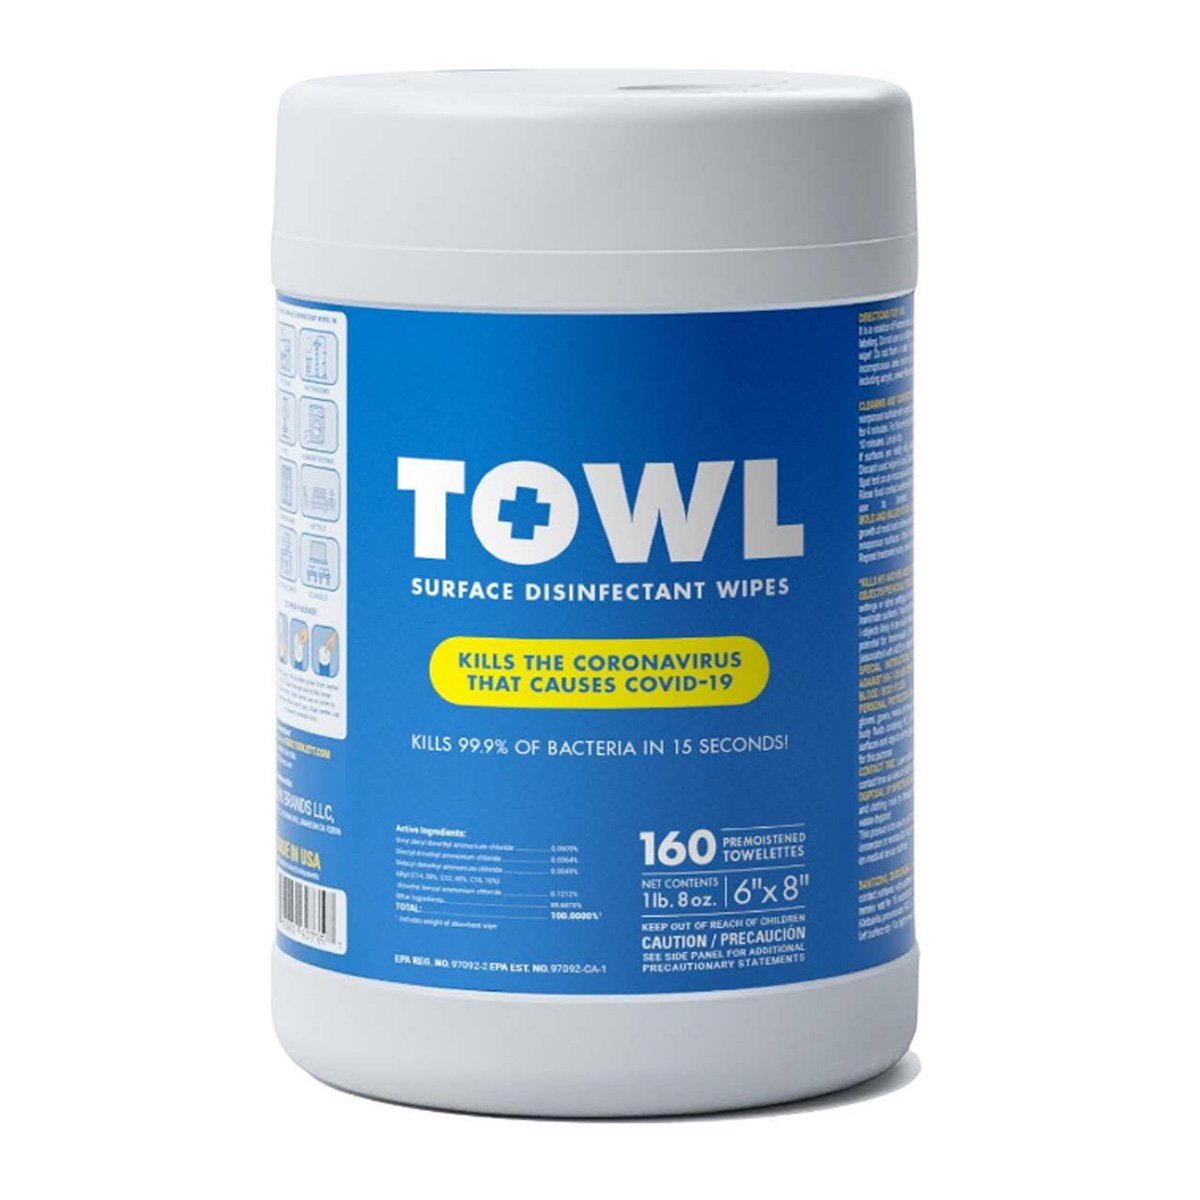 TOWL Surface Disinfectant Wipes